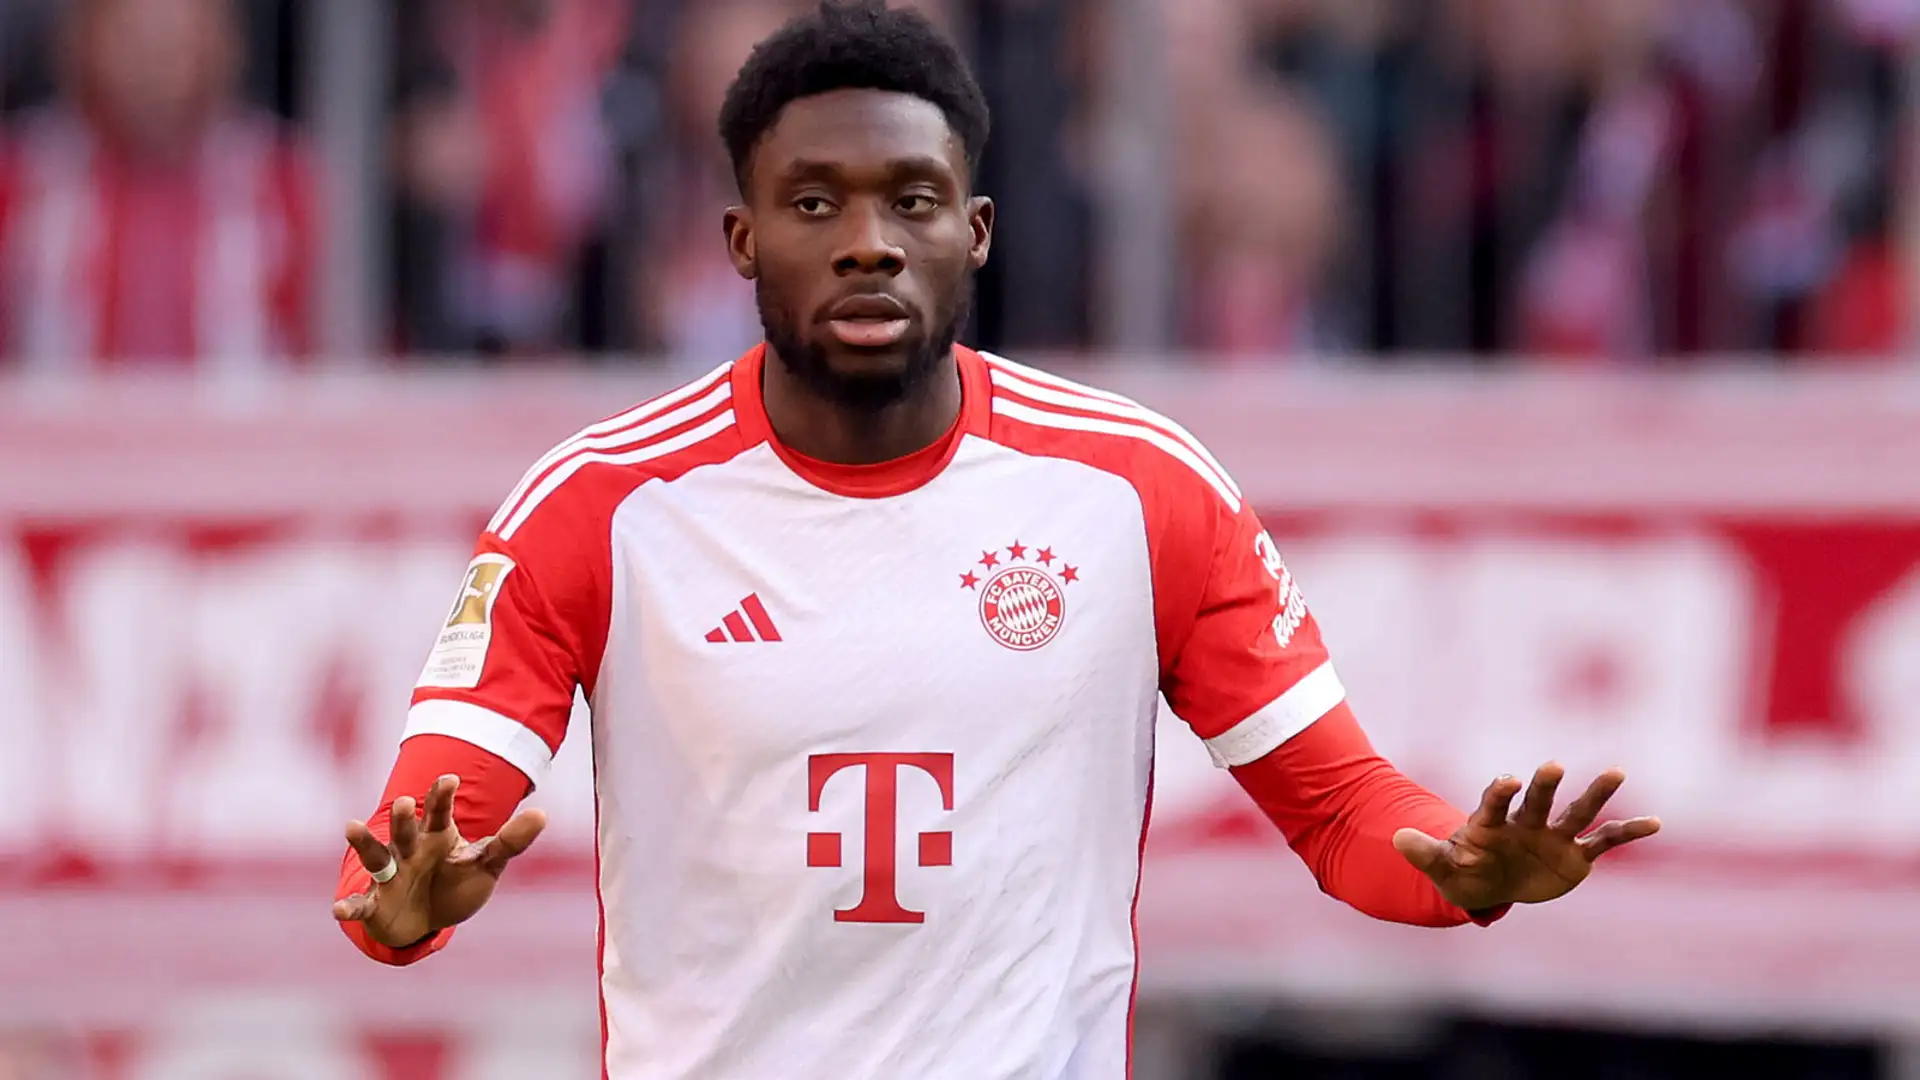 Have Bayern found Alphonso Davies’ replacement? German giants in talks with €60m target as Canada star continues to toy with Real Madrid move